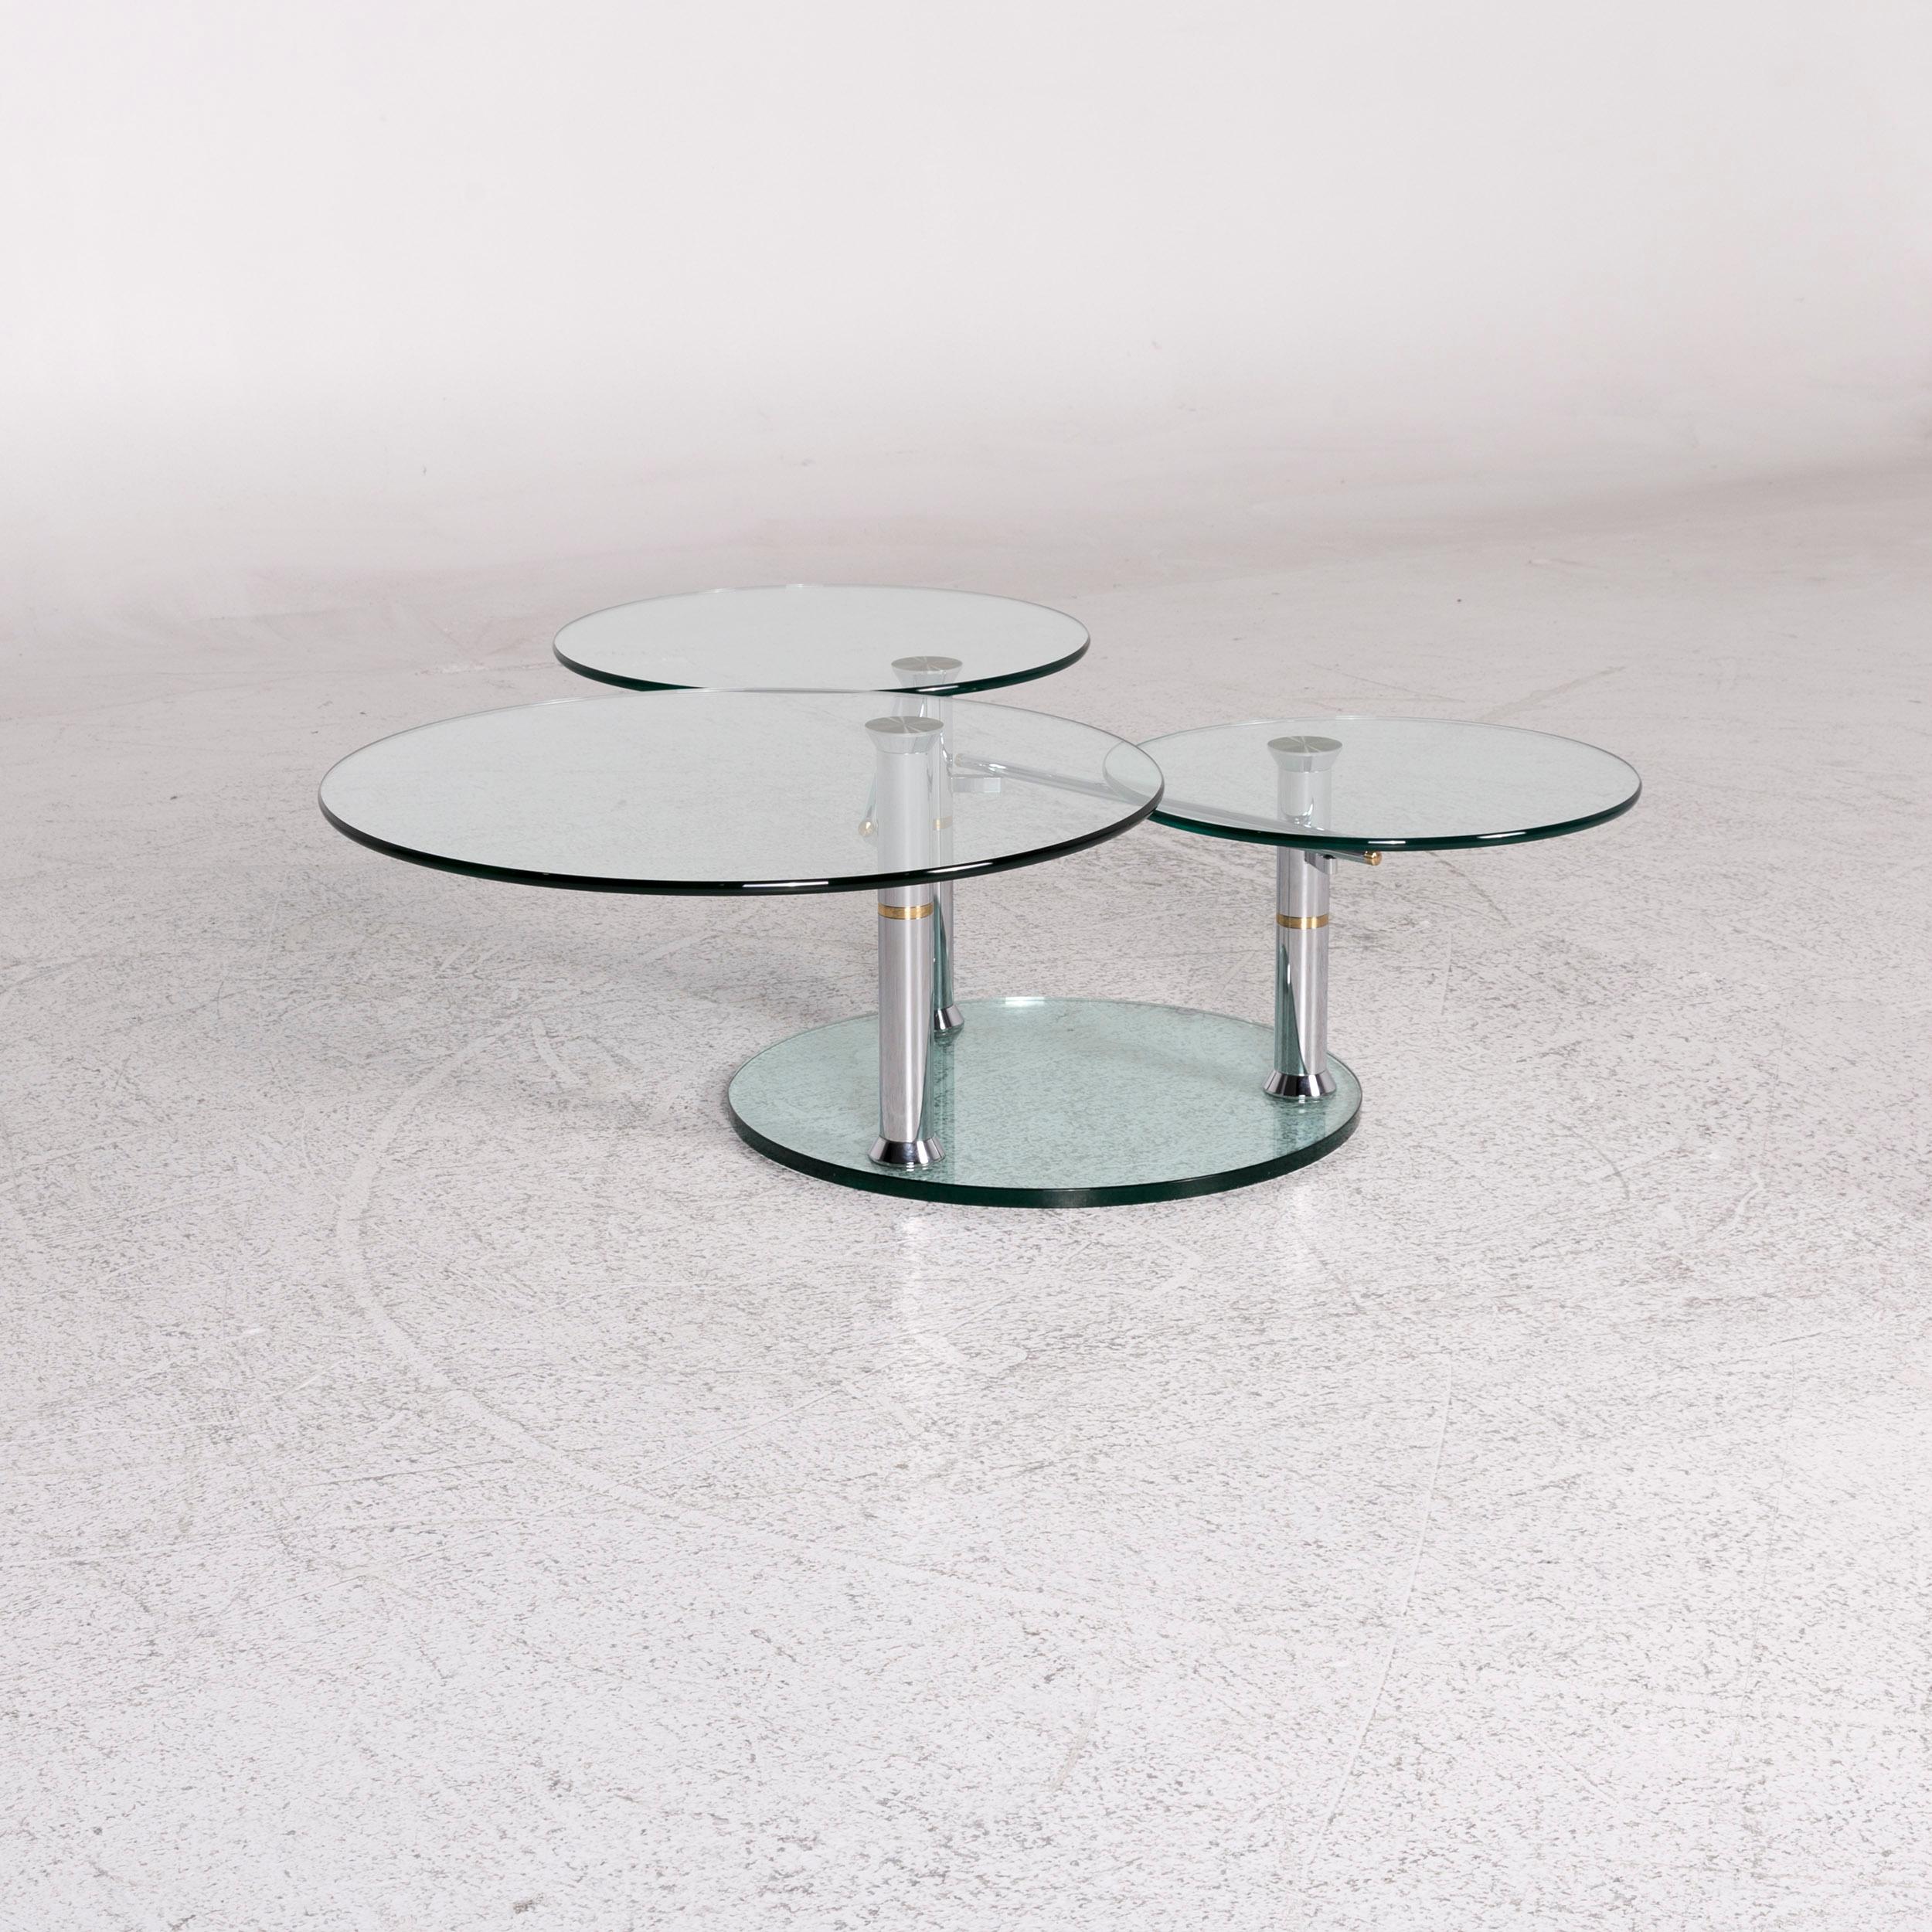 We bring to you a Draenert Intermezzo glass coffee table silver rotary function.

 Product measurements in centimeters:
 
 Depth: 110
 Width: 83
 Height: 43.





 